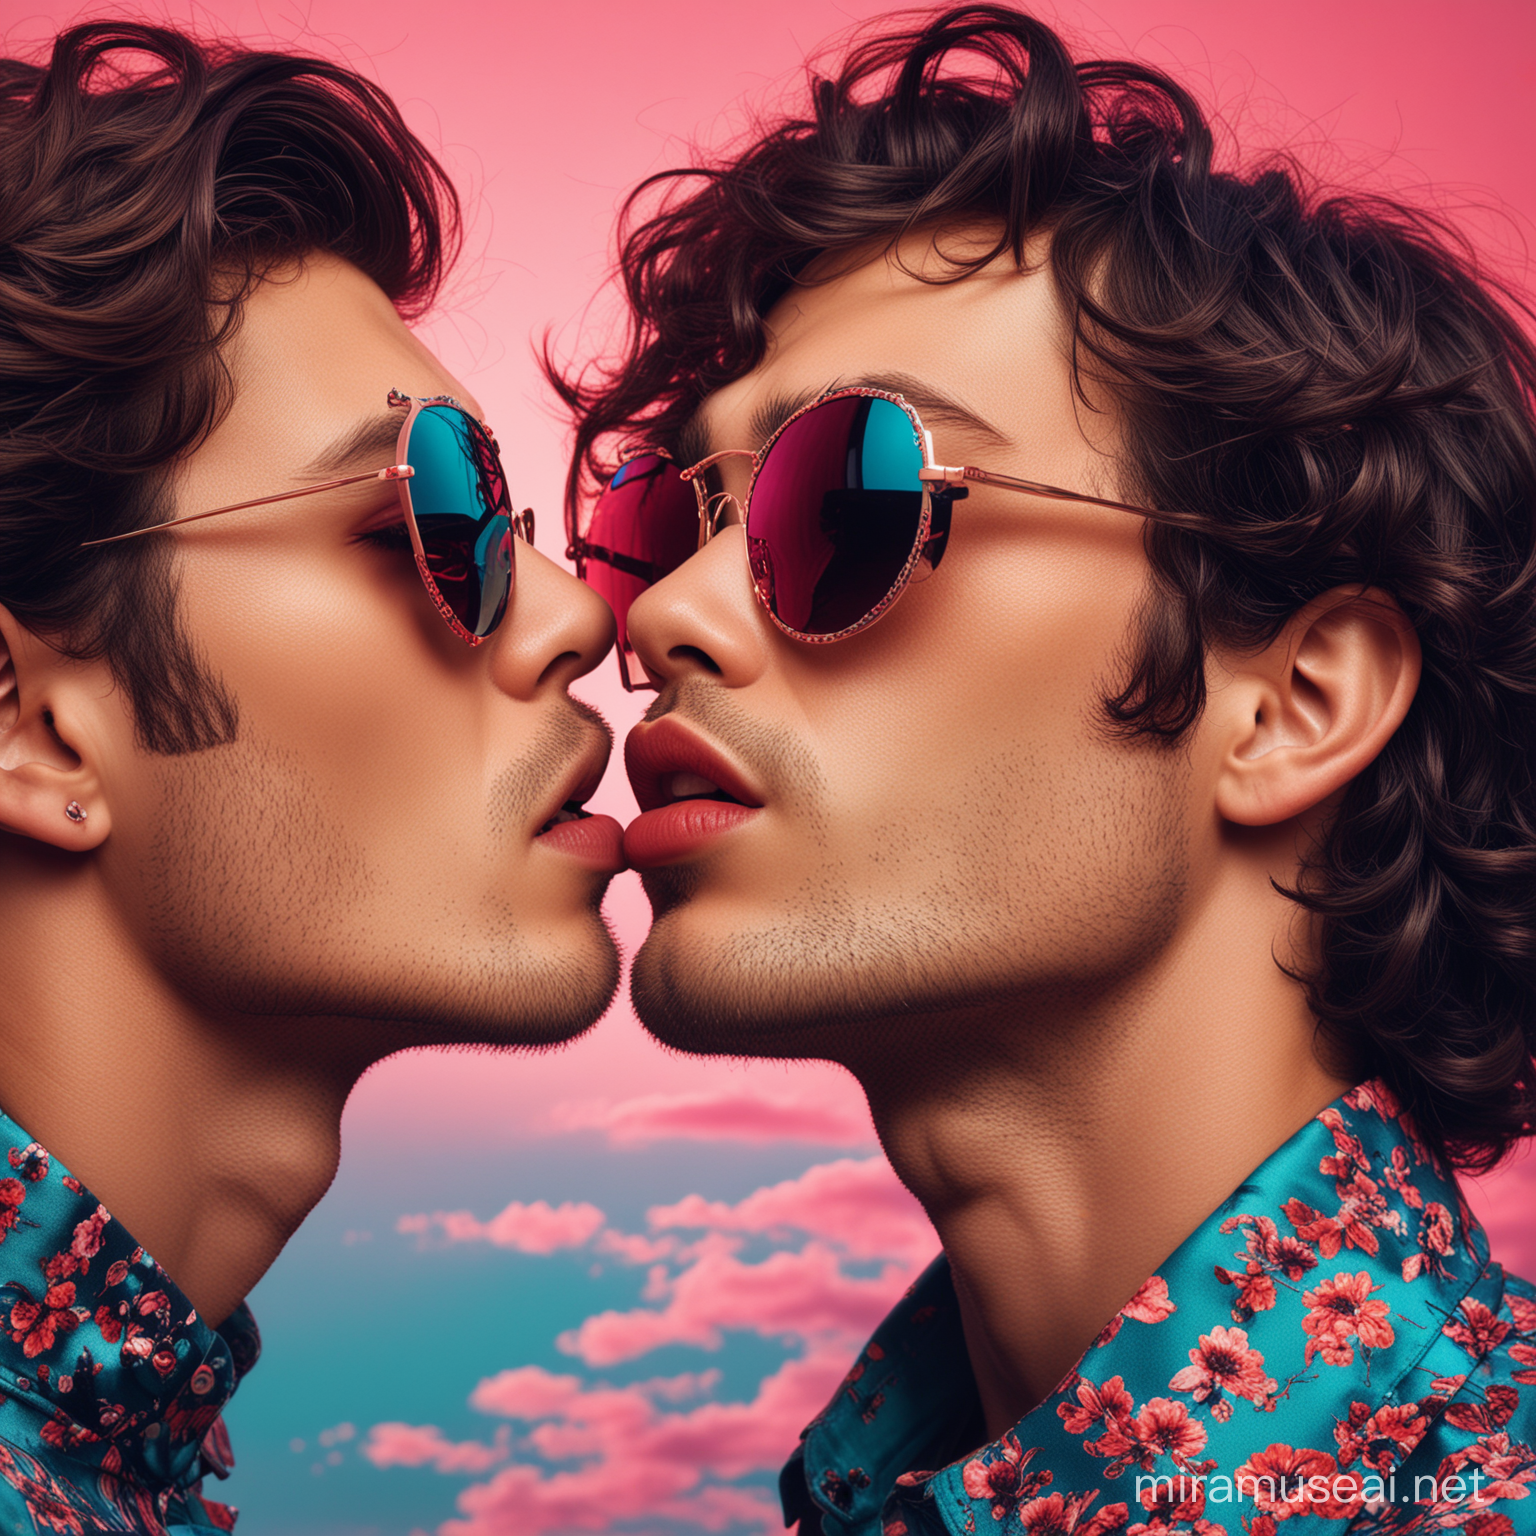 Psychedelic Fashion Photography Edgy Model with Pink and Teal Sunglasses